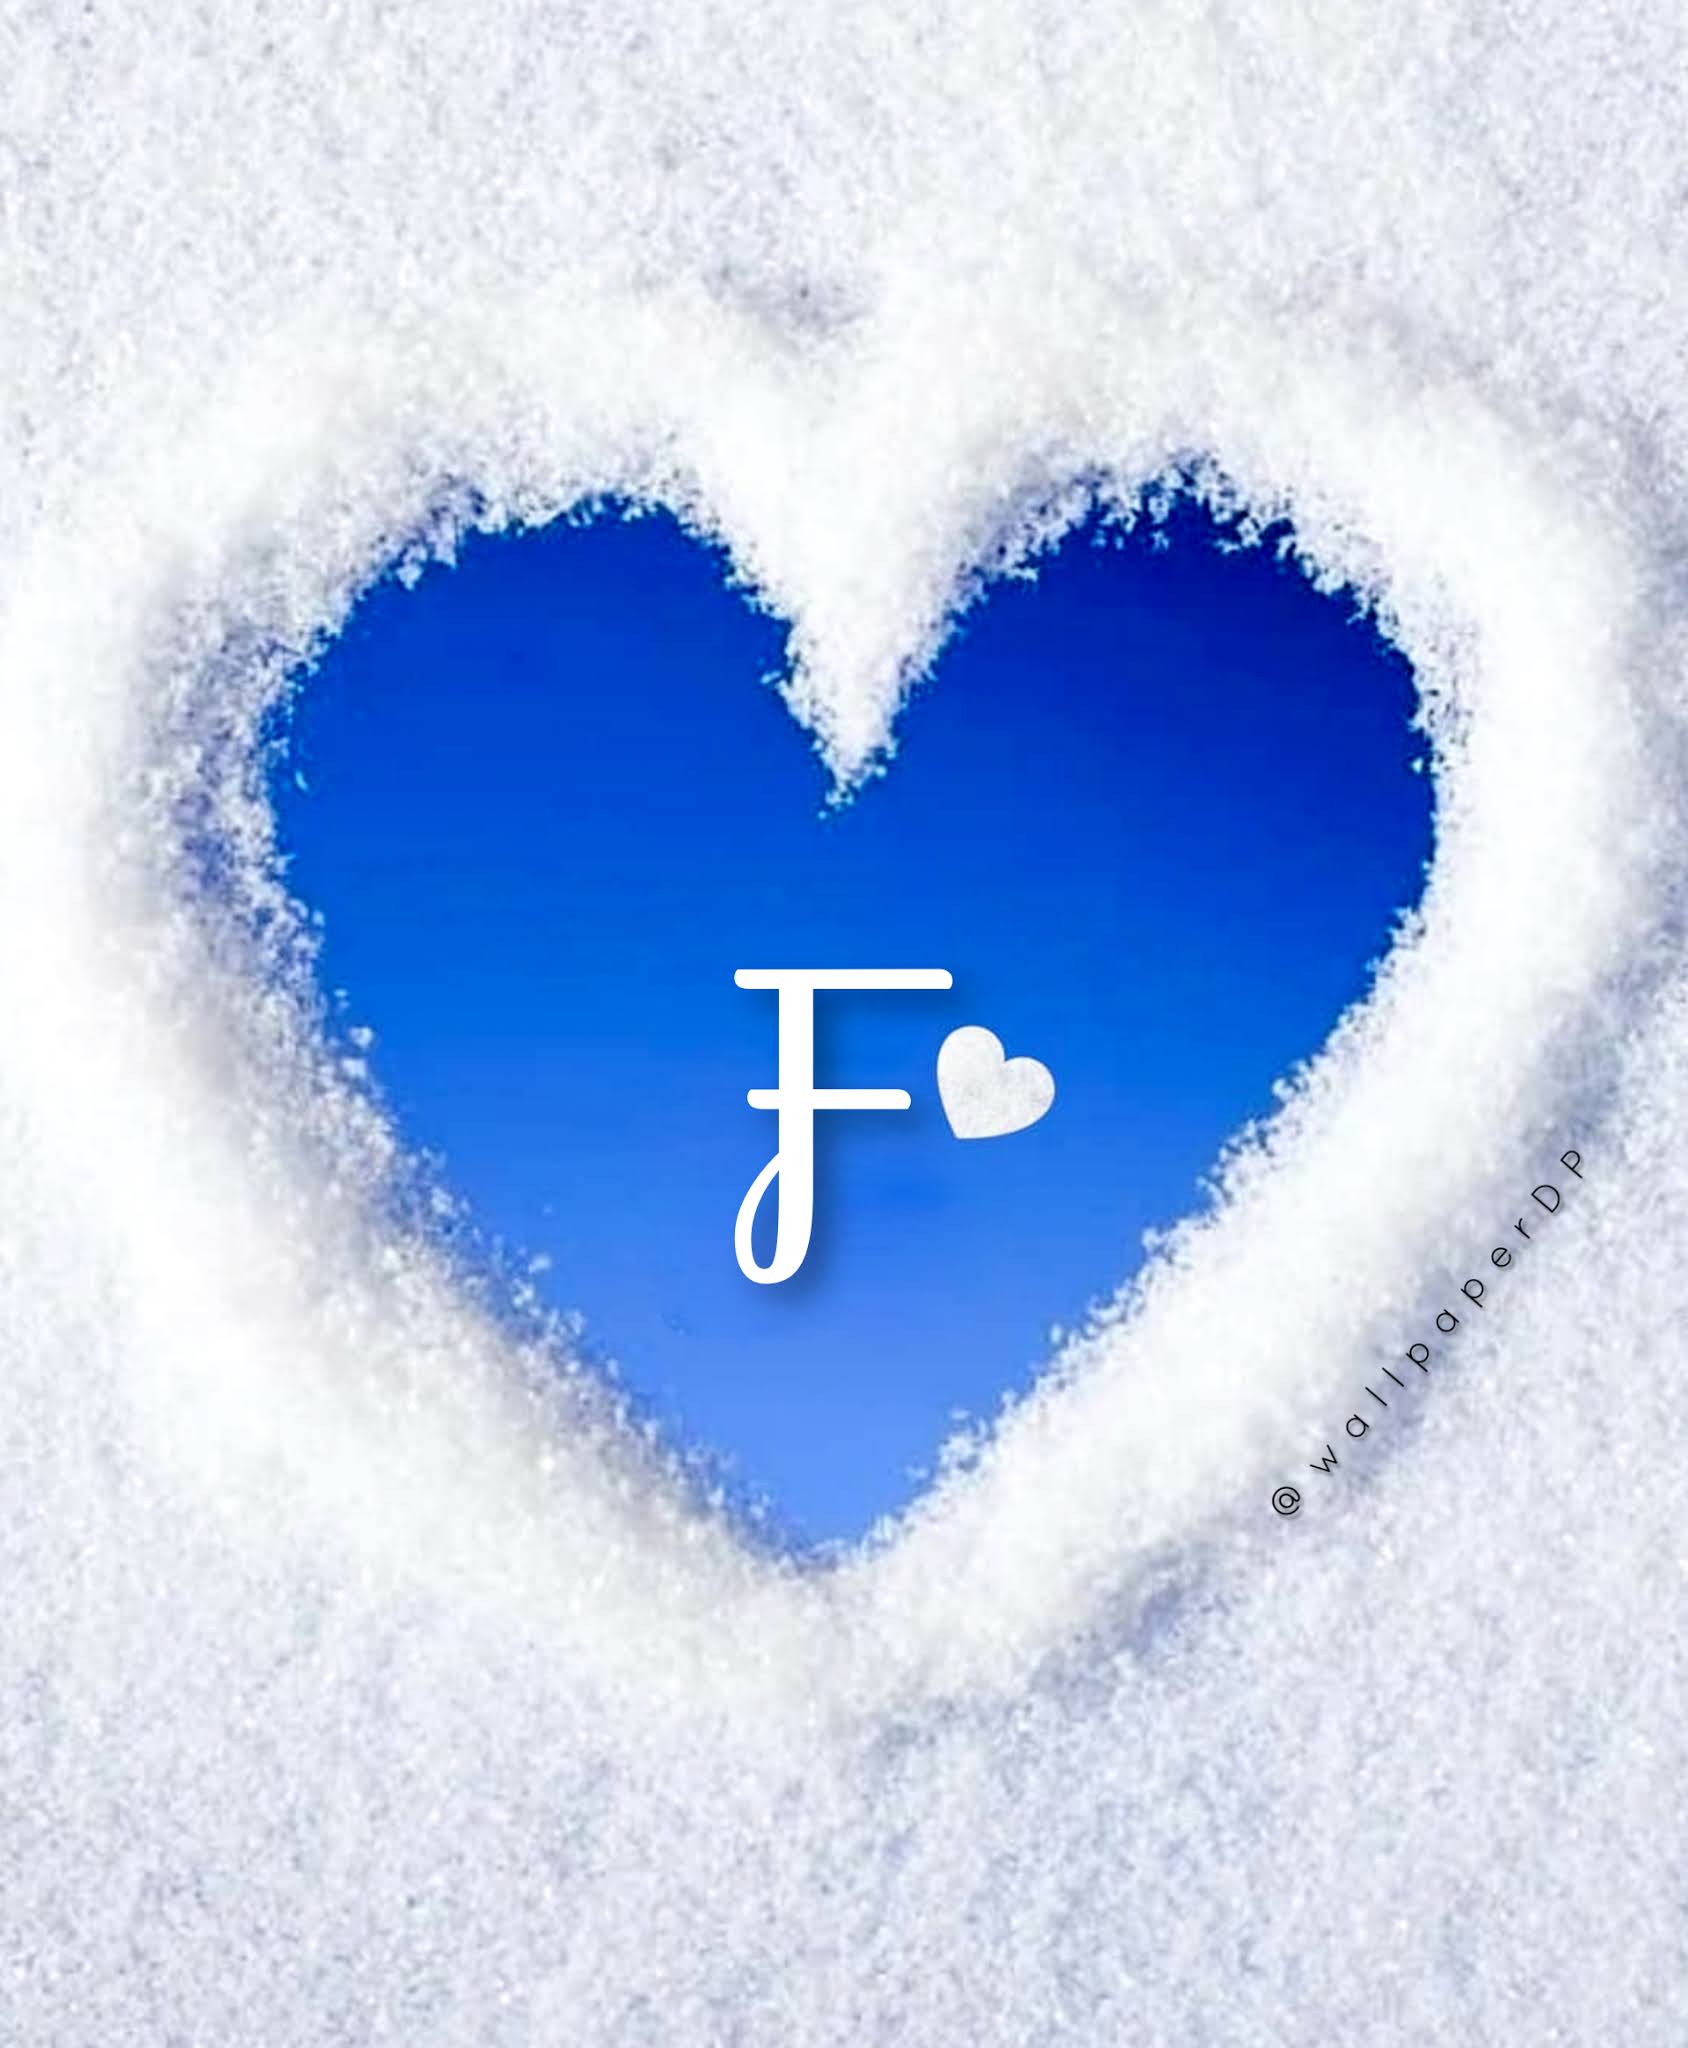 100+] Letter F Wallpapers | Wallpapers.com